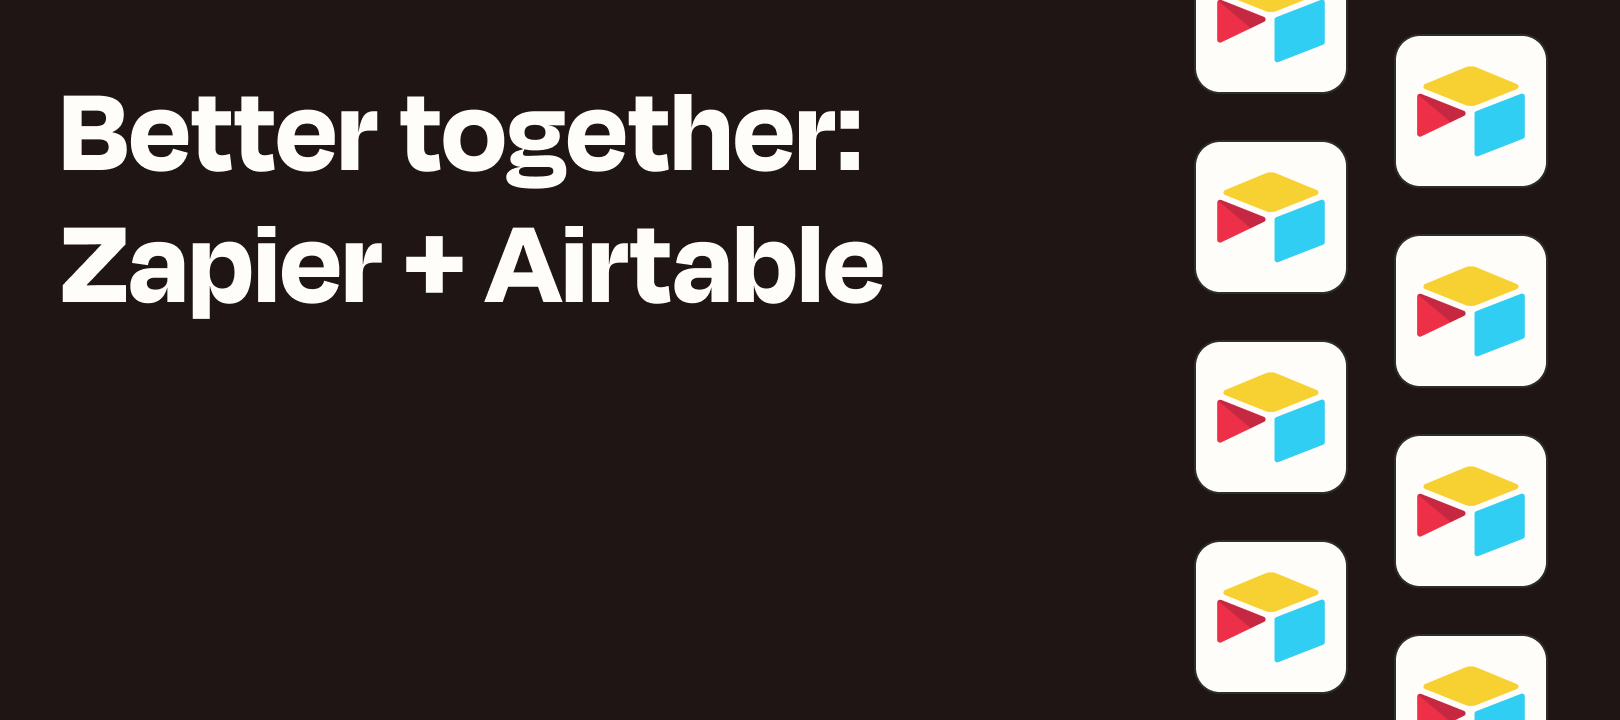 5 ways that Airtable and Zapier are better together